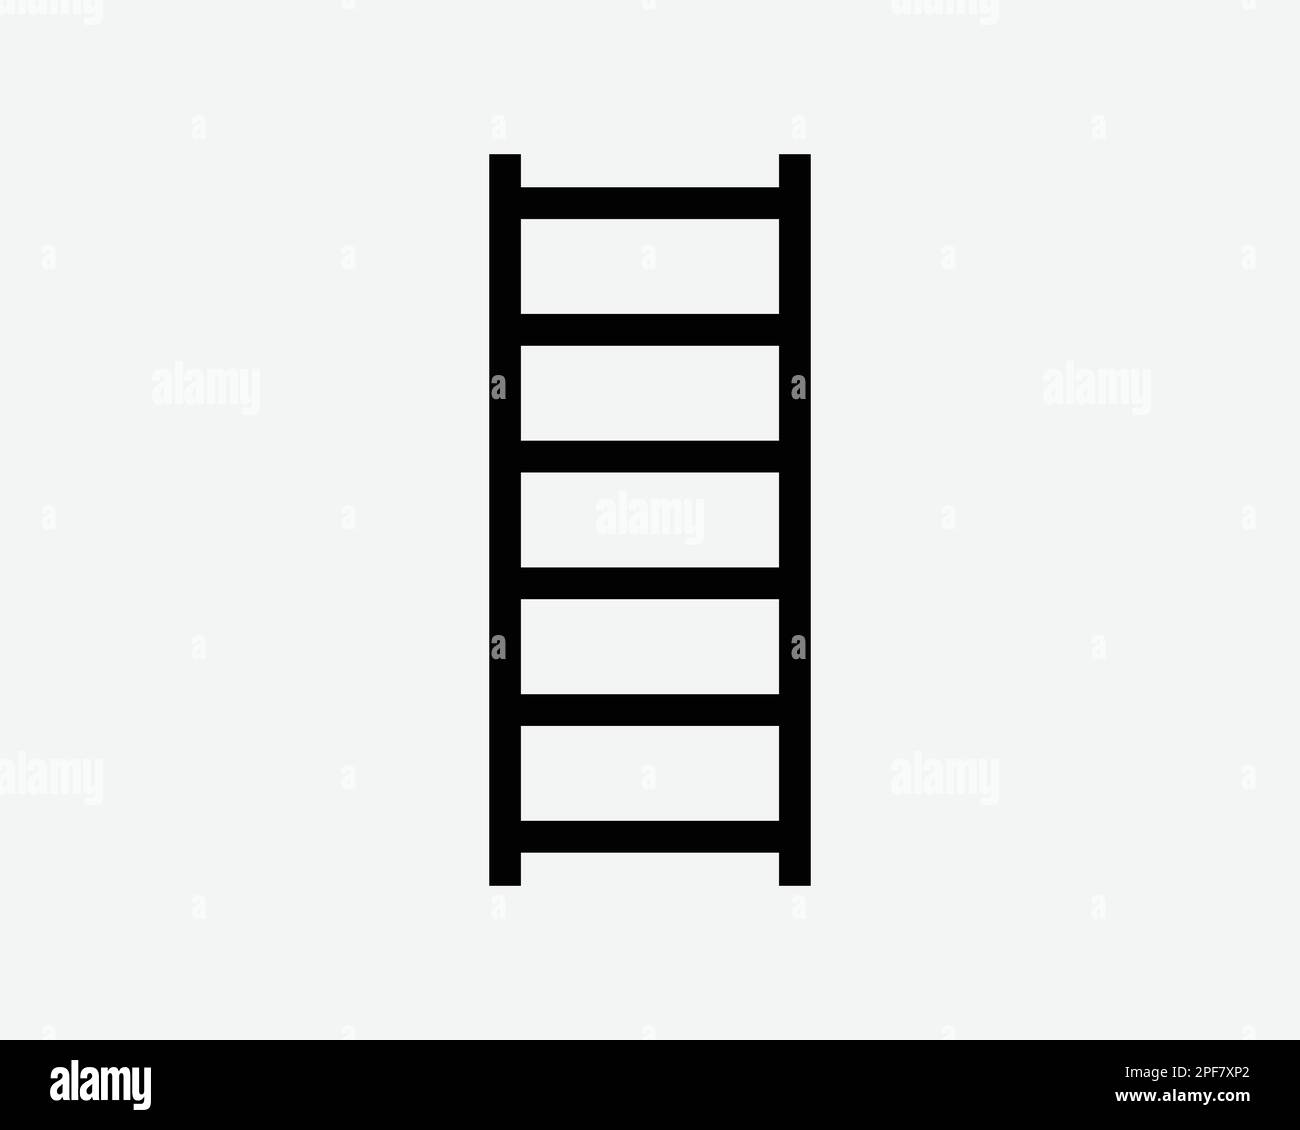 Ladder Steps Step Stairs Stair Staircase Climb Line Black White Silhouette Sign Symbol Icon Clipart Graphic Artwork Pictogram Illustration Vector Stock Vector